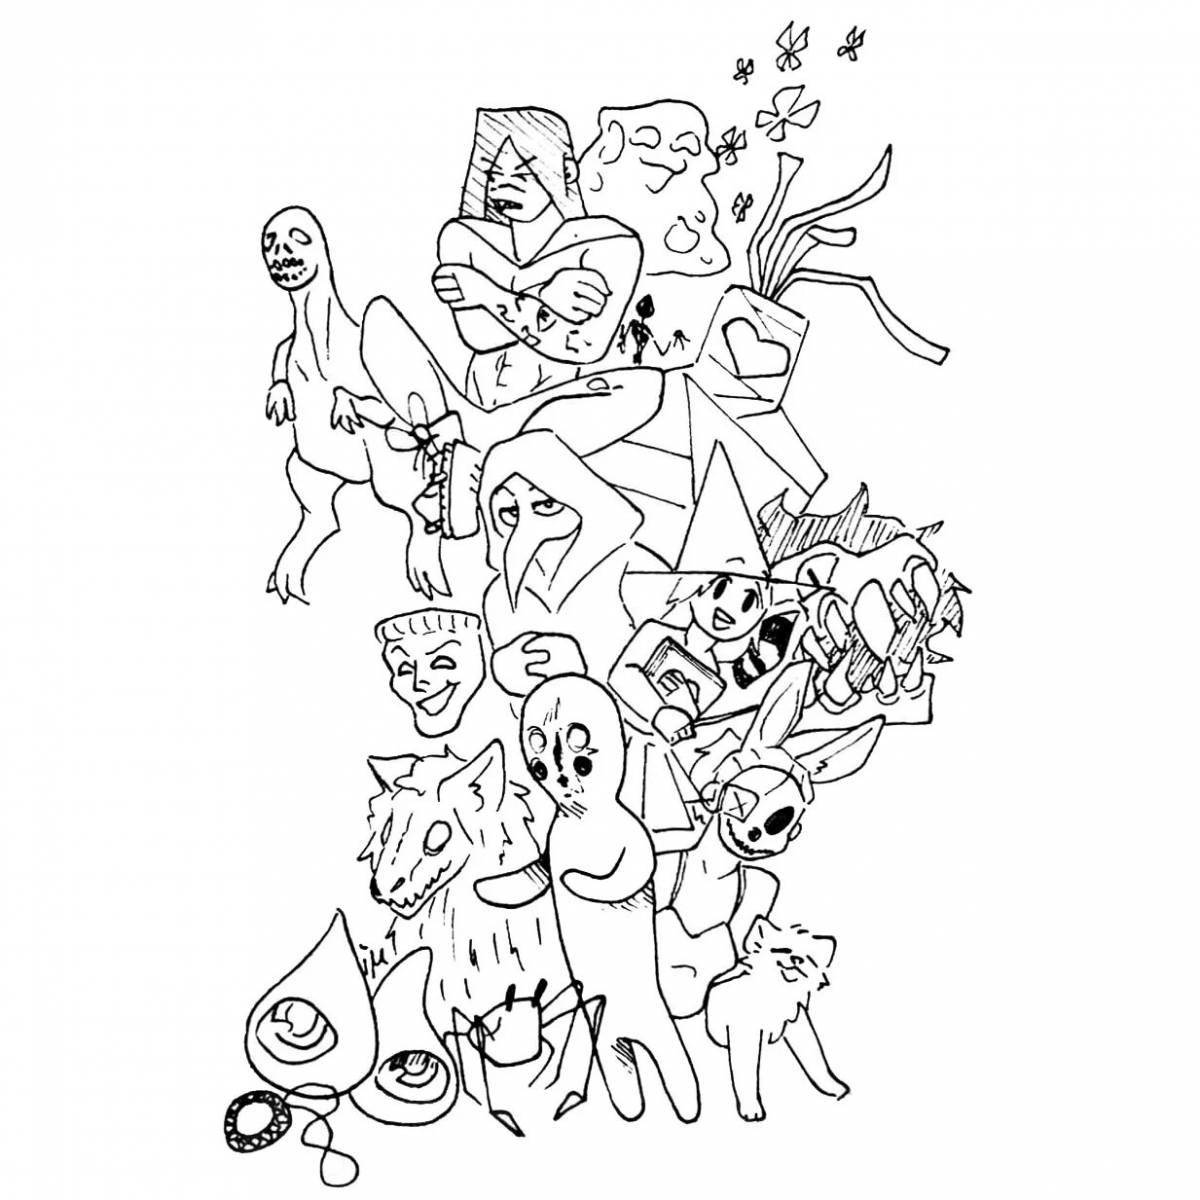 Asip fund playful coloring page